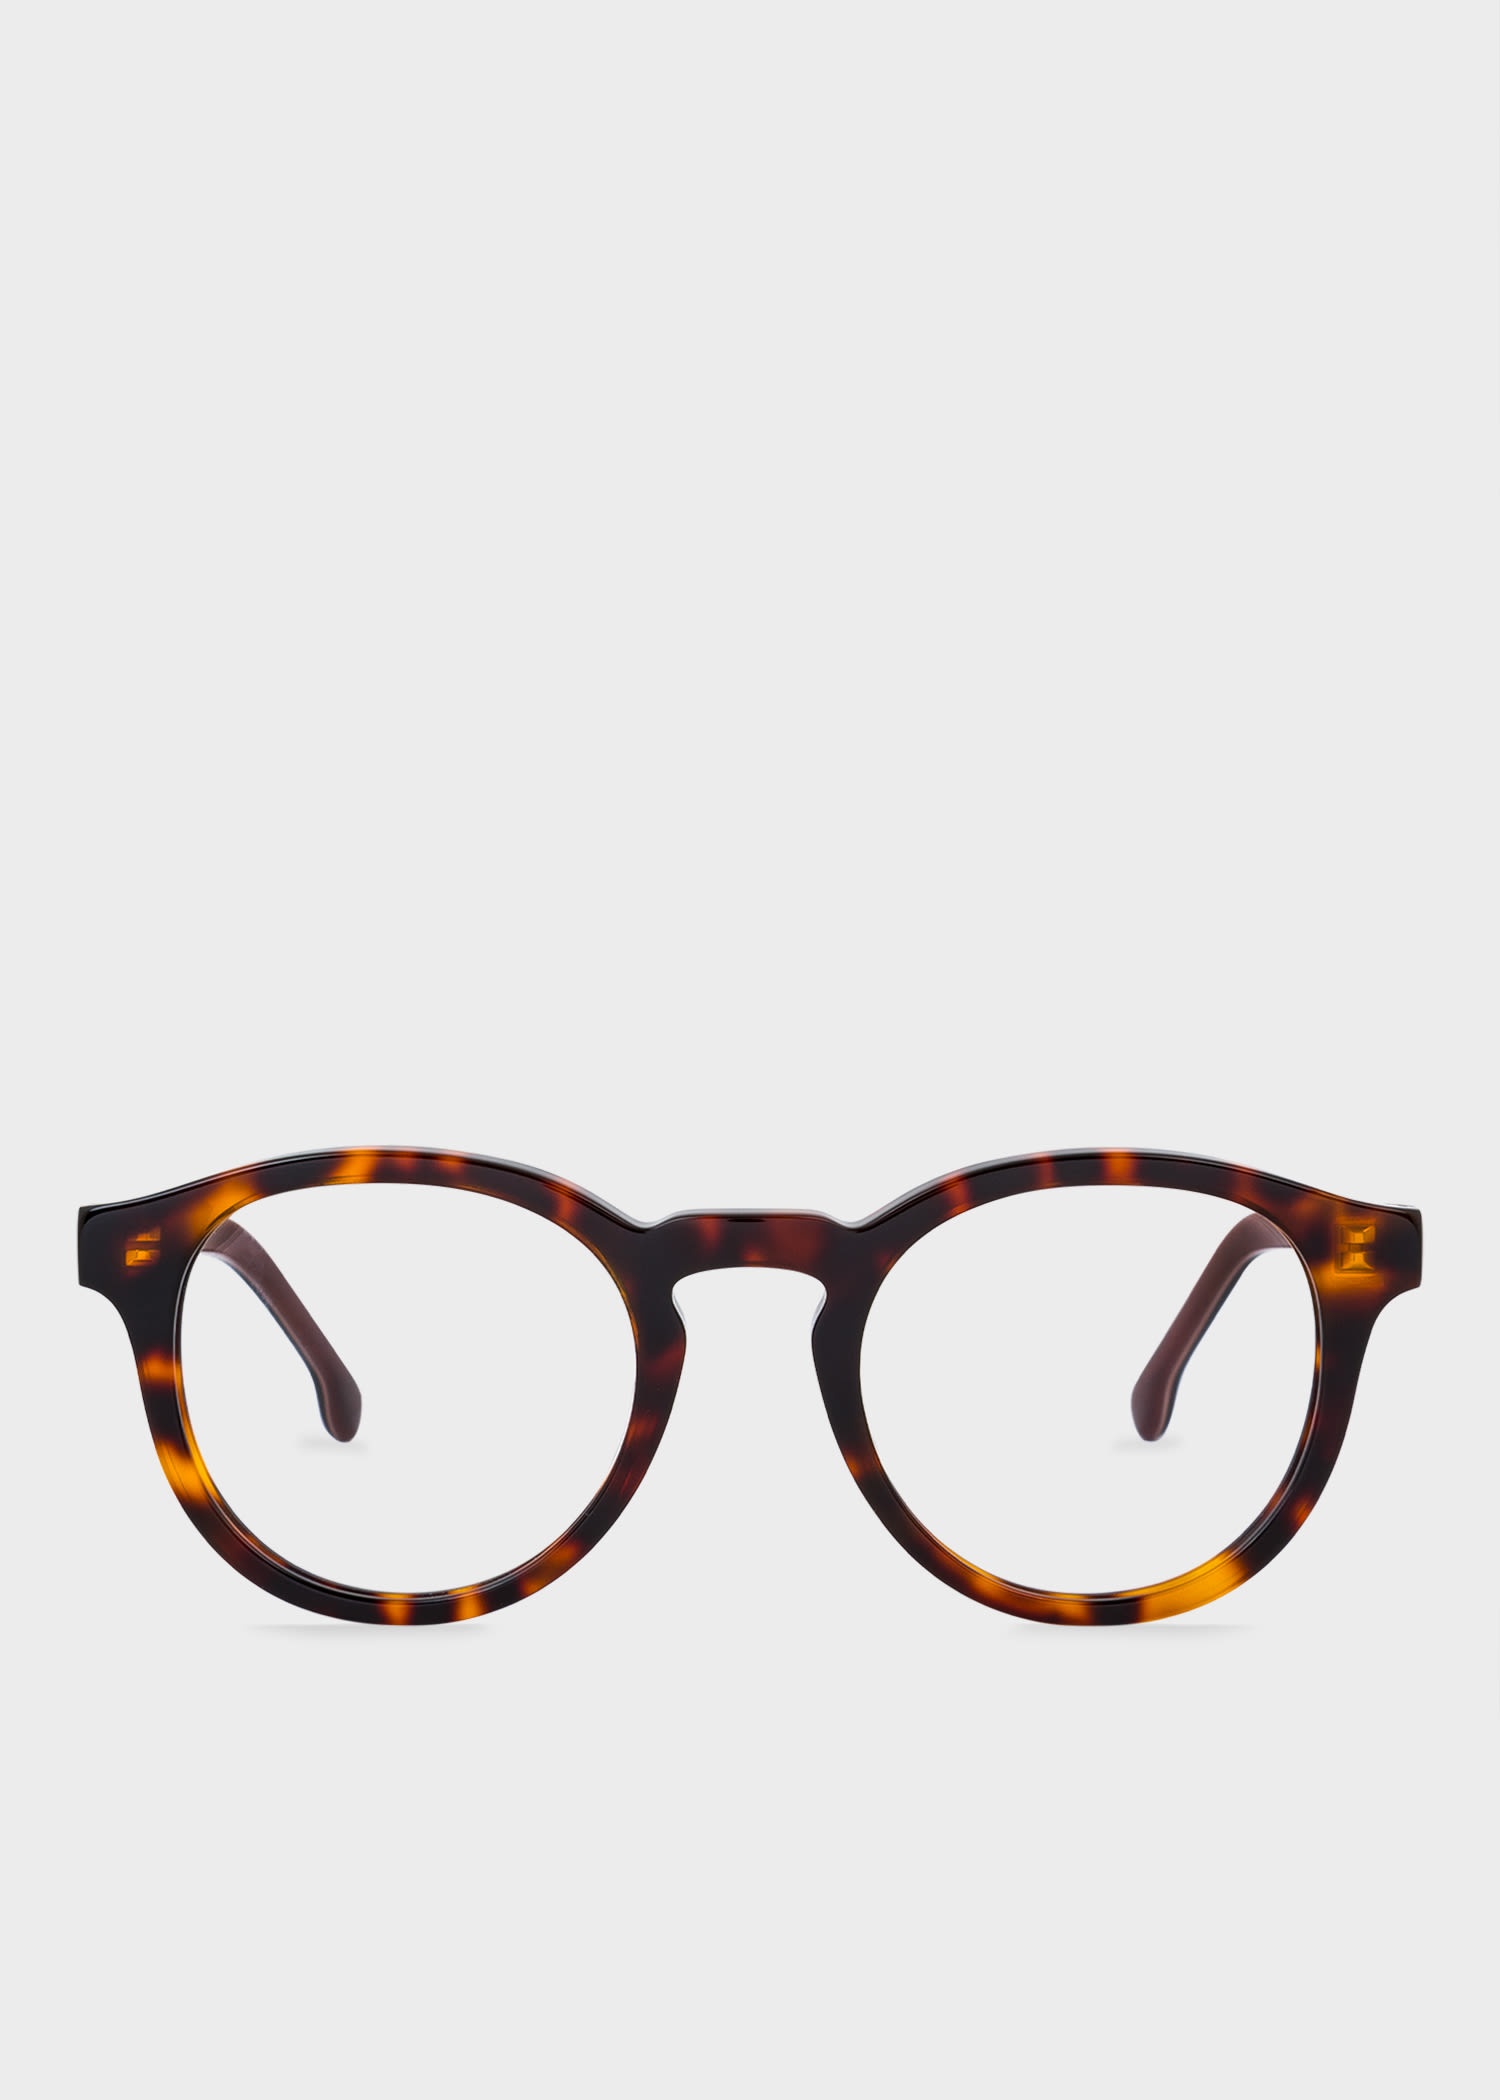 'Ernest' Spectacles - 1